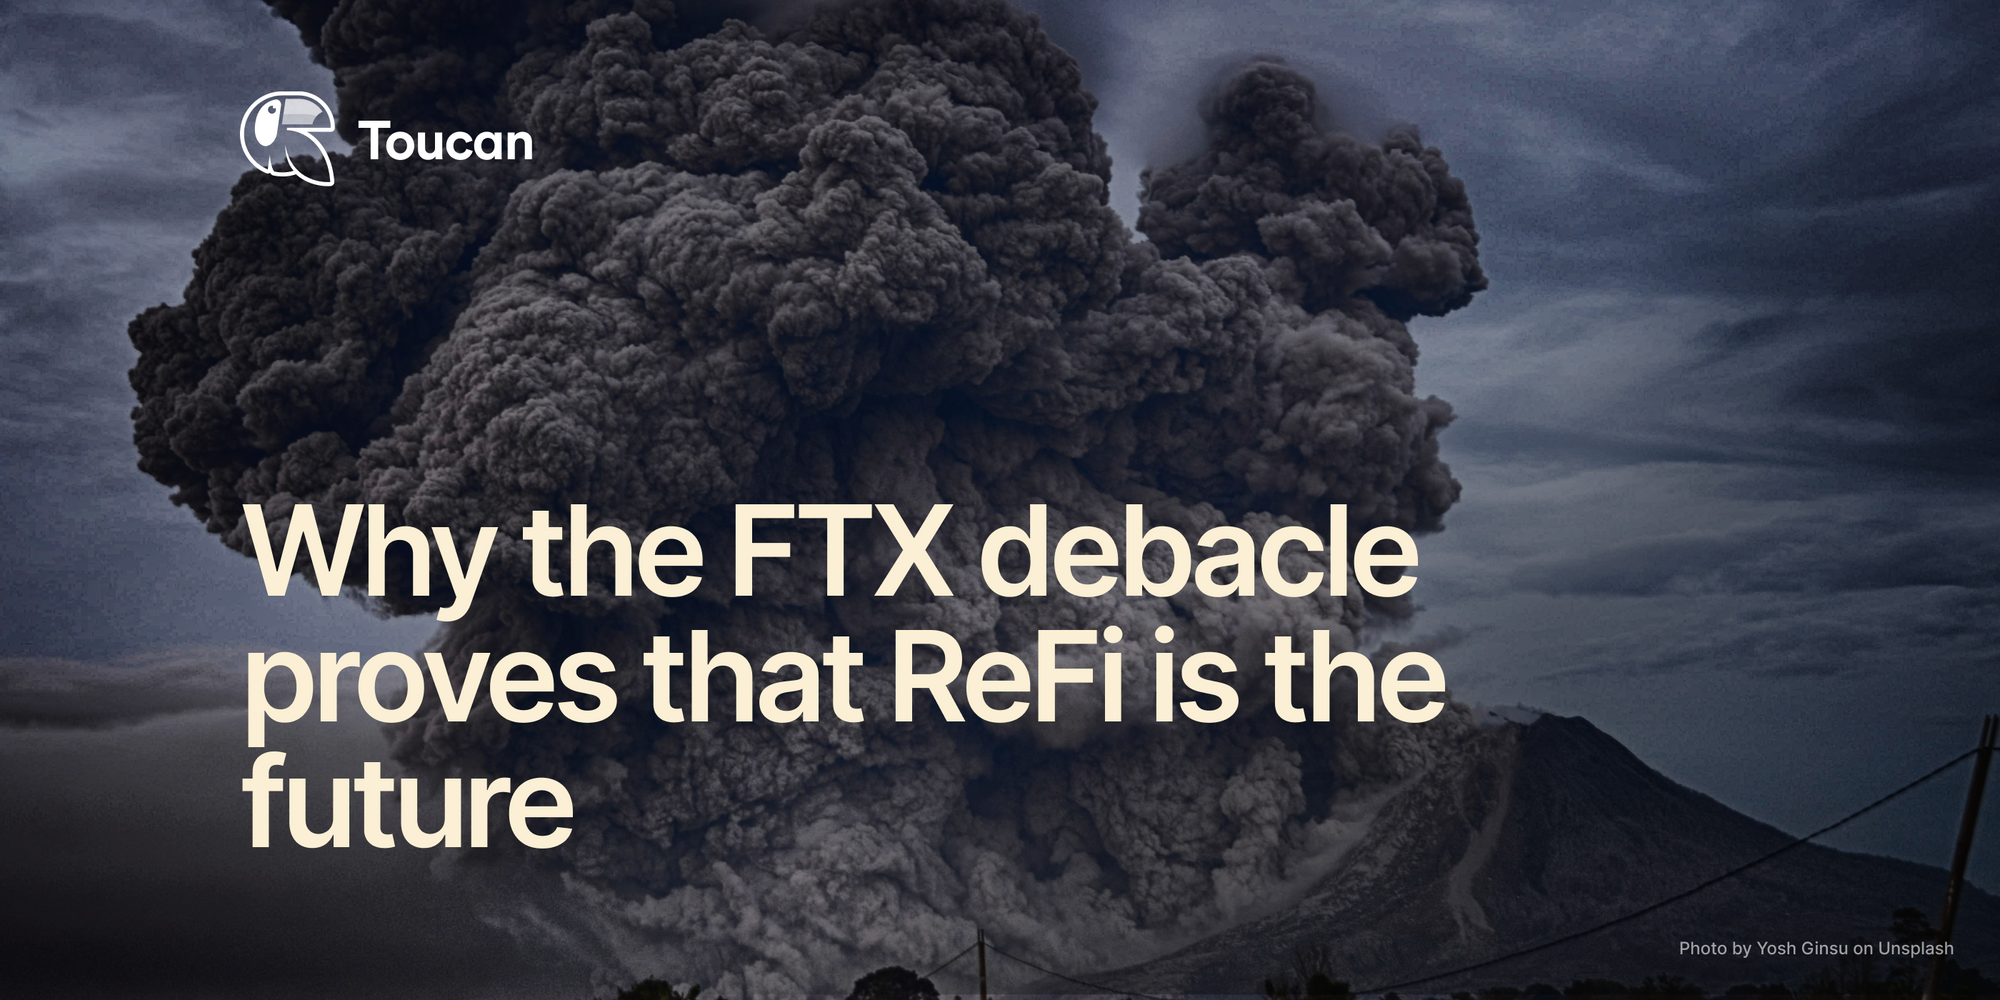 Why the FTX debacle proves that DeFi (and ReFi) are the future